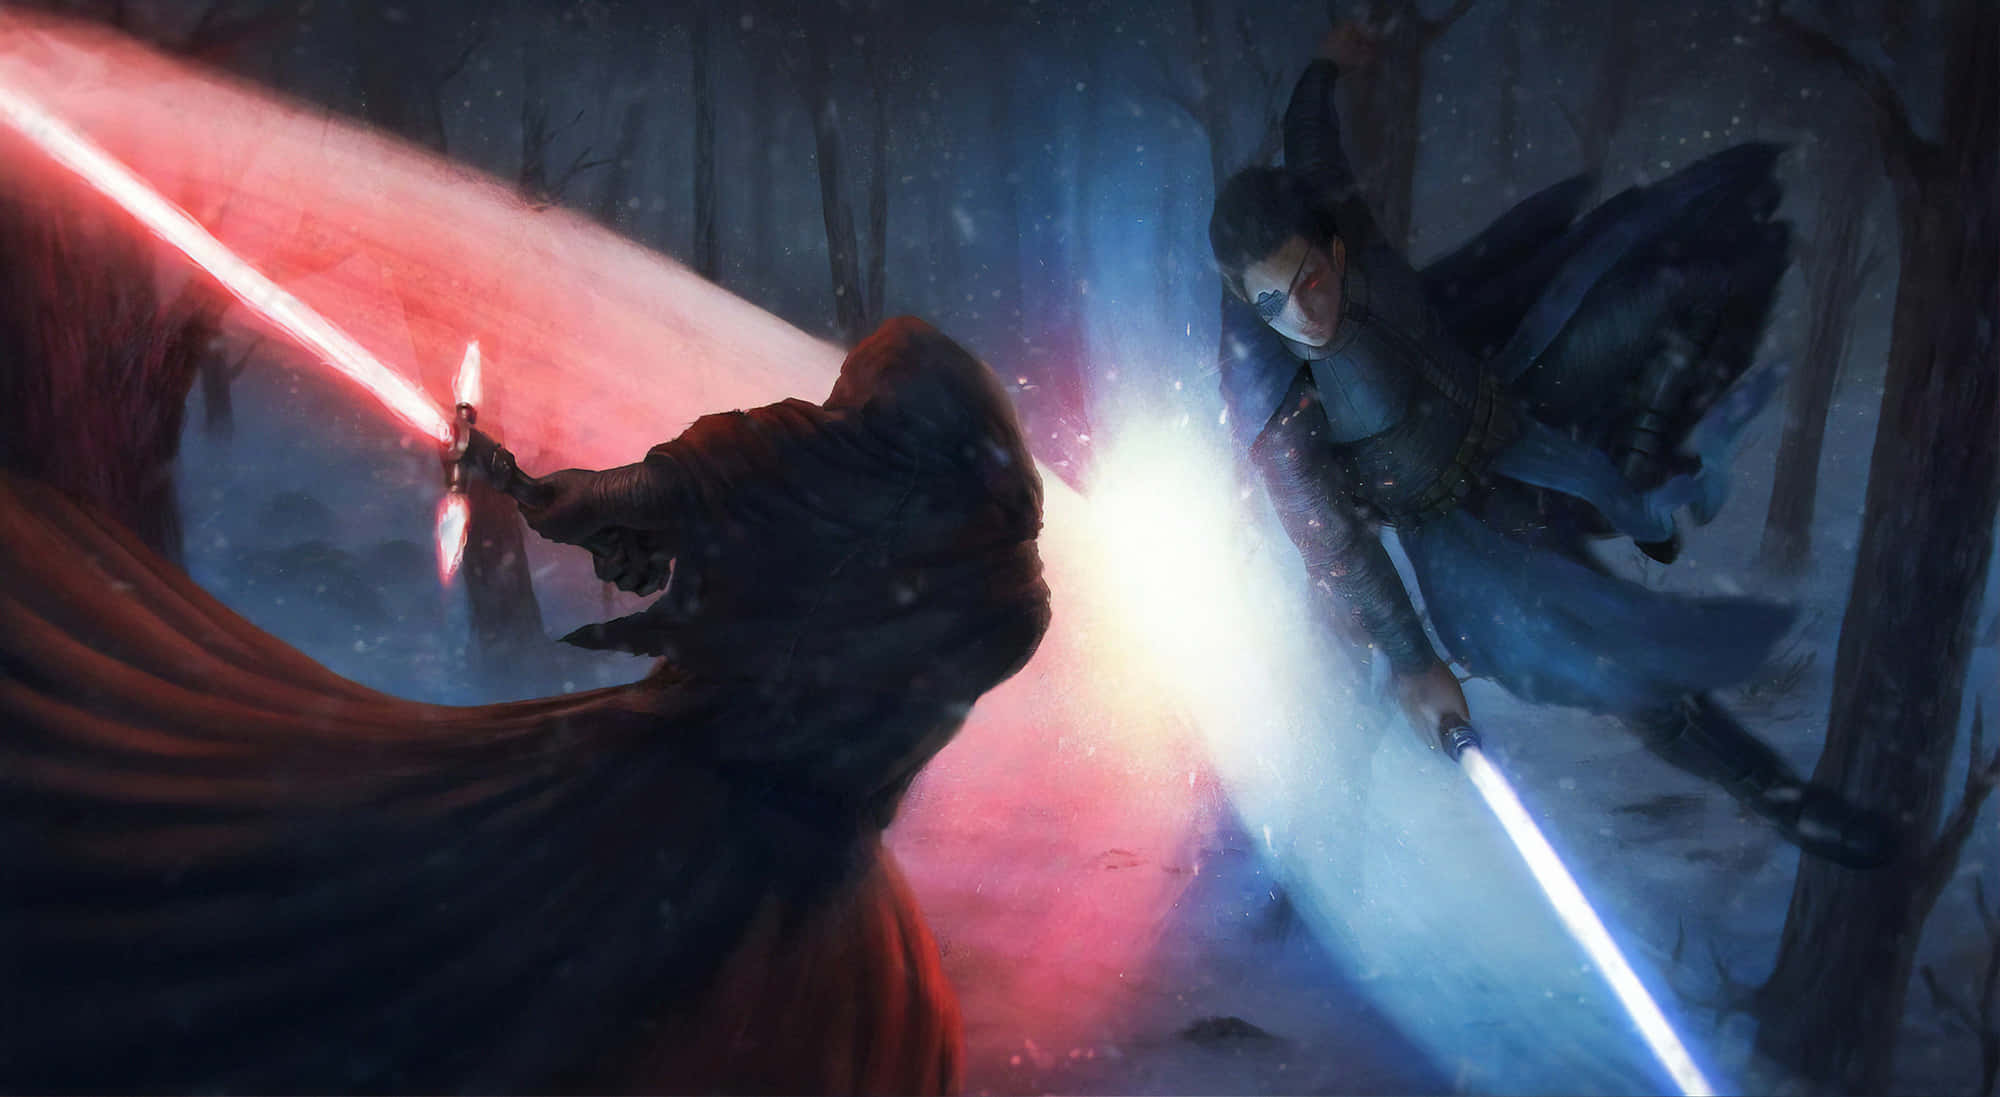 Lightsaber Duel: Exerting Strength, Skill, and Courage Wallpaper